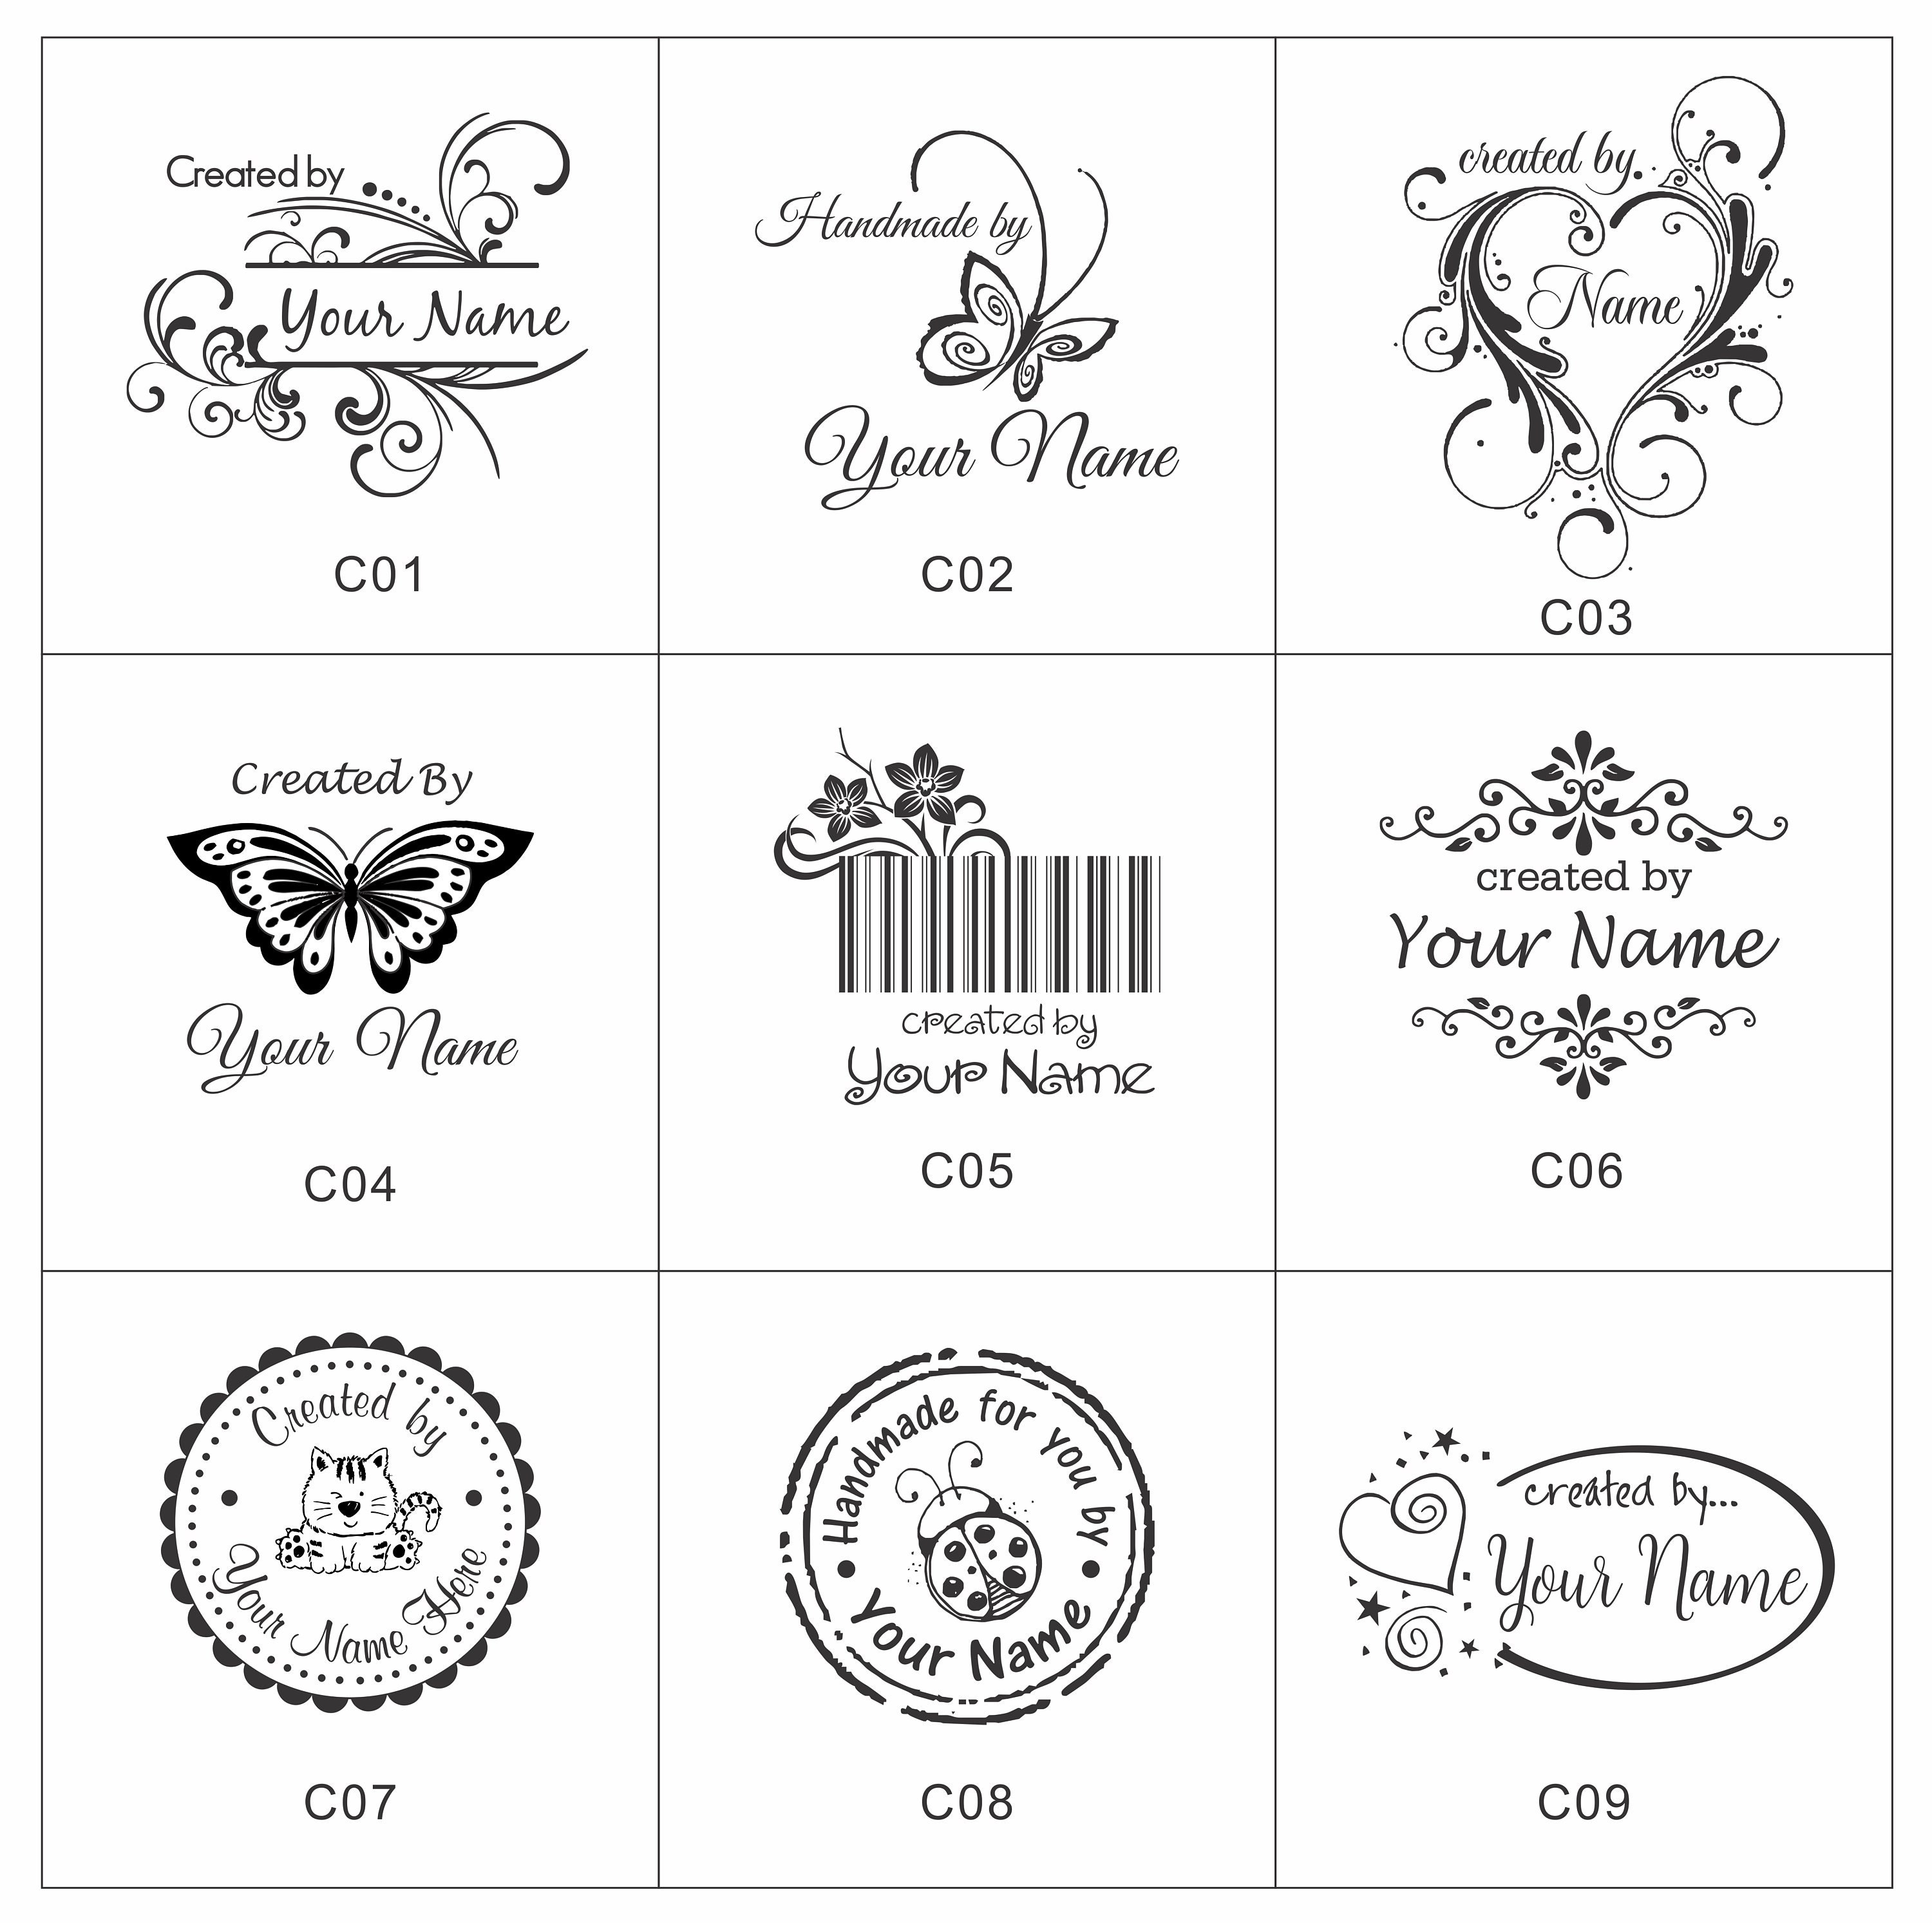 Custom Rubber Stamp - Logo Stamp - Business Branding - Return Address -  Wedding - Business Card - Personalized text or image - Self Inking